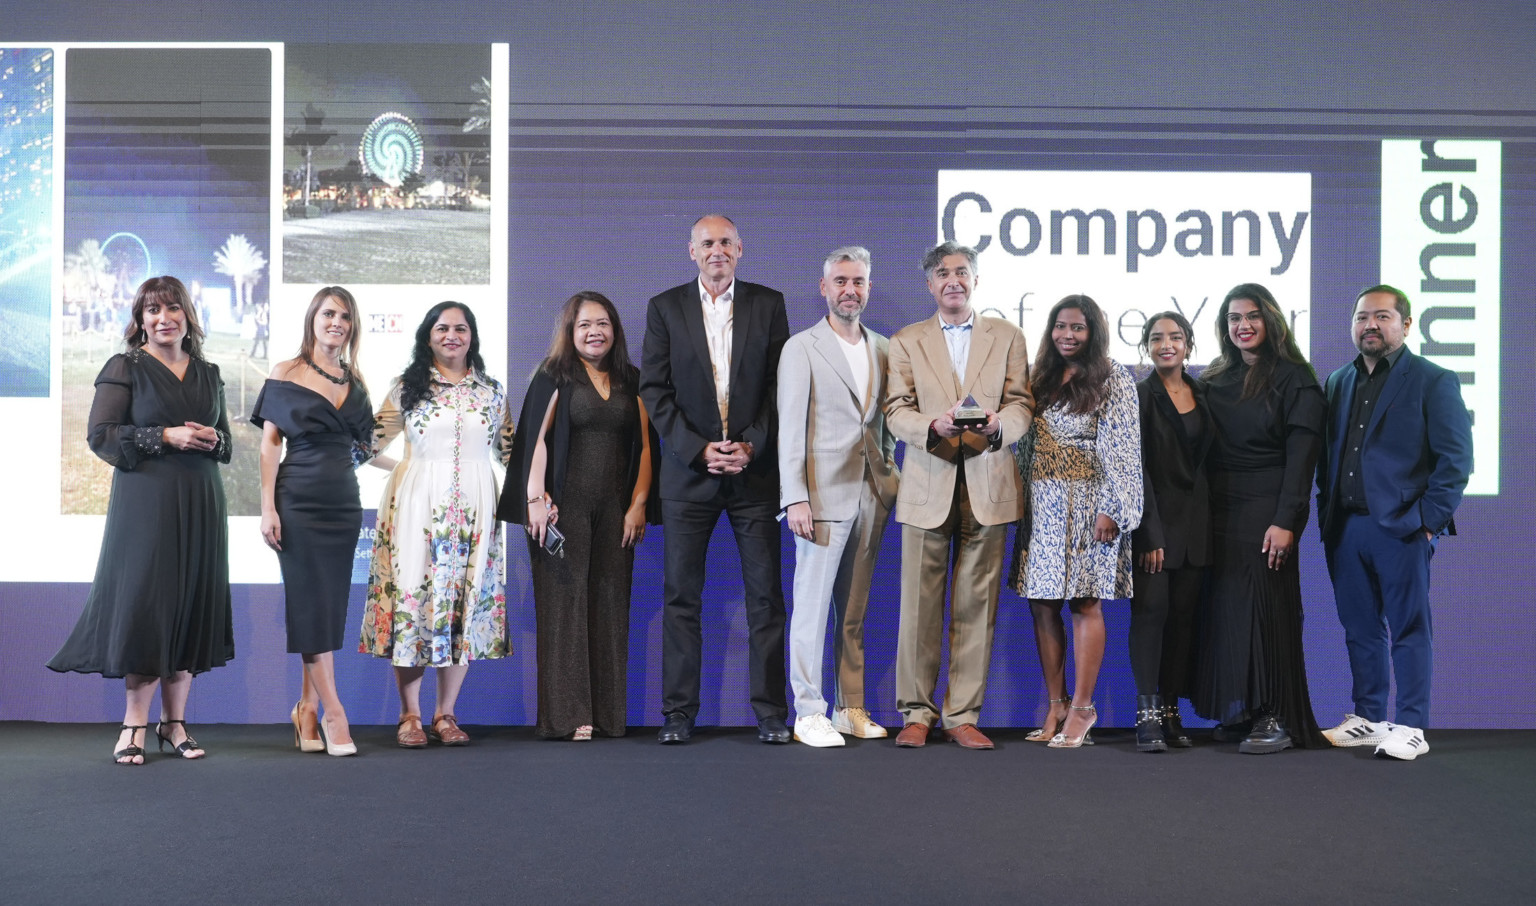 DLR Group's design team in Dubai standing next to each other after receiving the award for 2022 Company of the Year